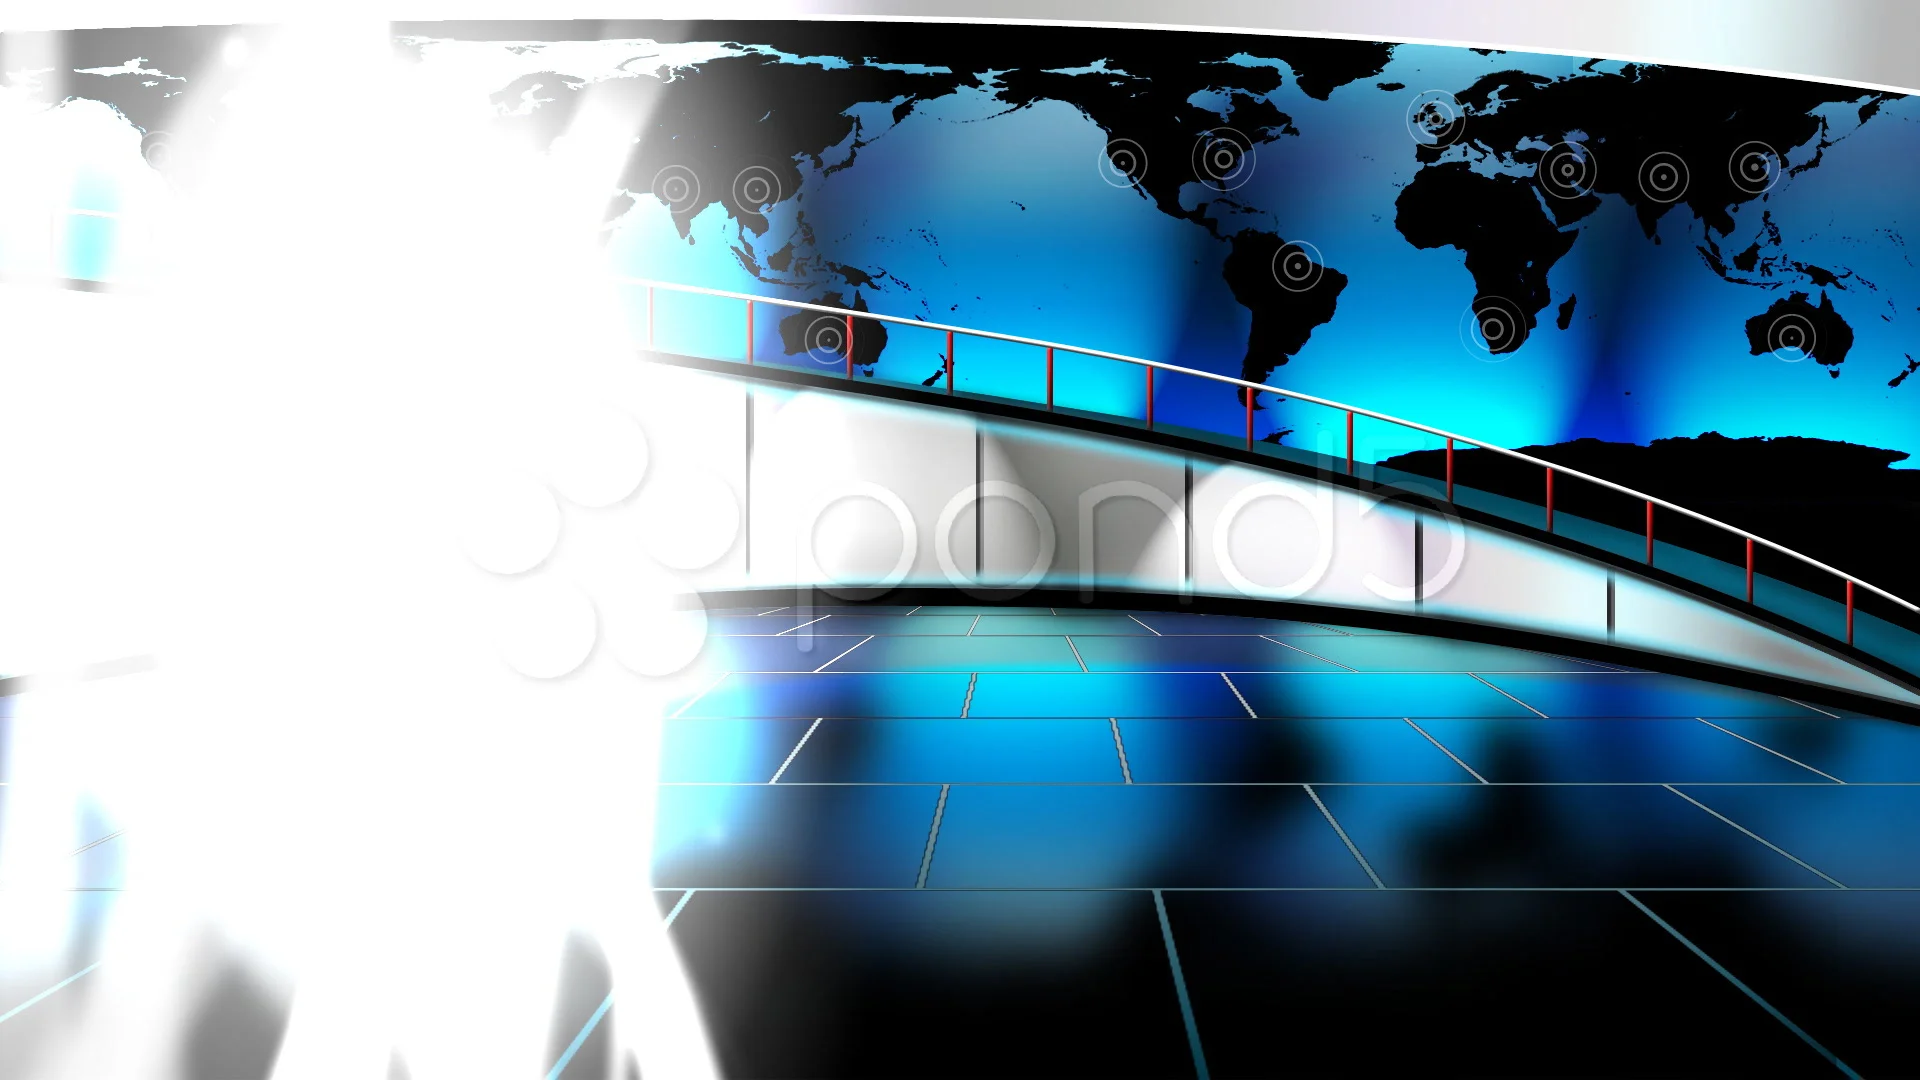 HD Virtual TV Studio News Set With Globe Earth Map In Background